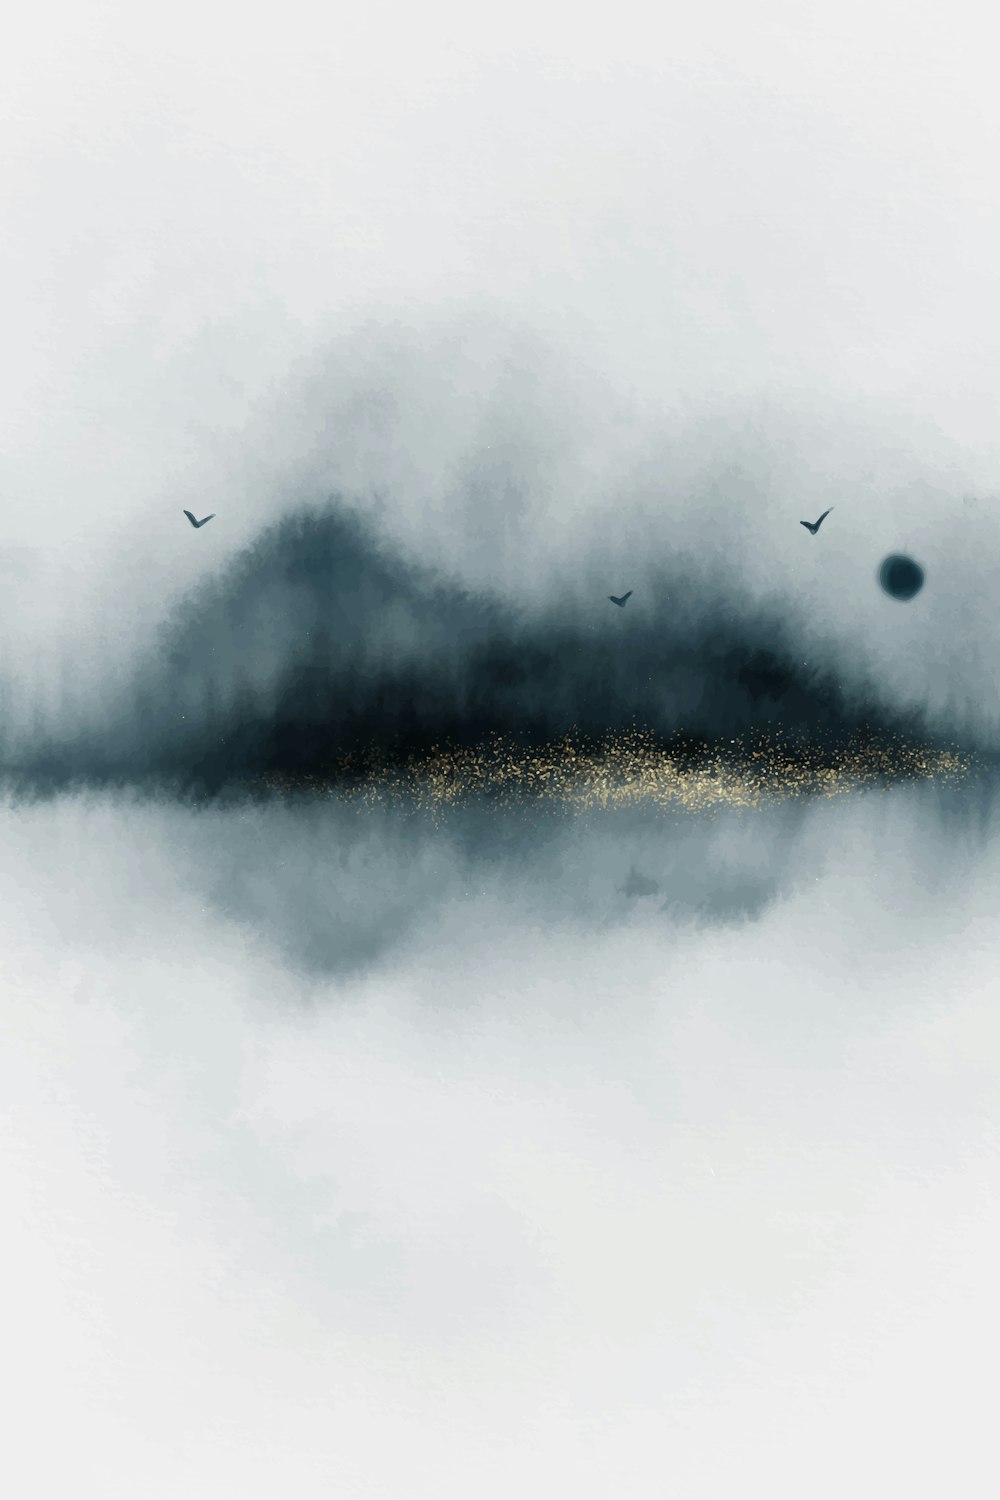 a foggy sky with birds flying over it